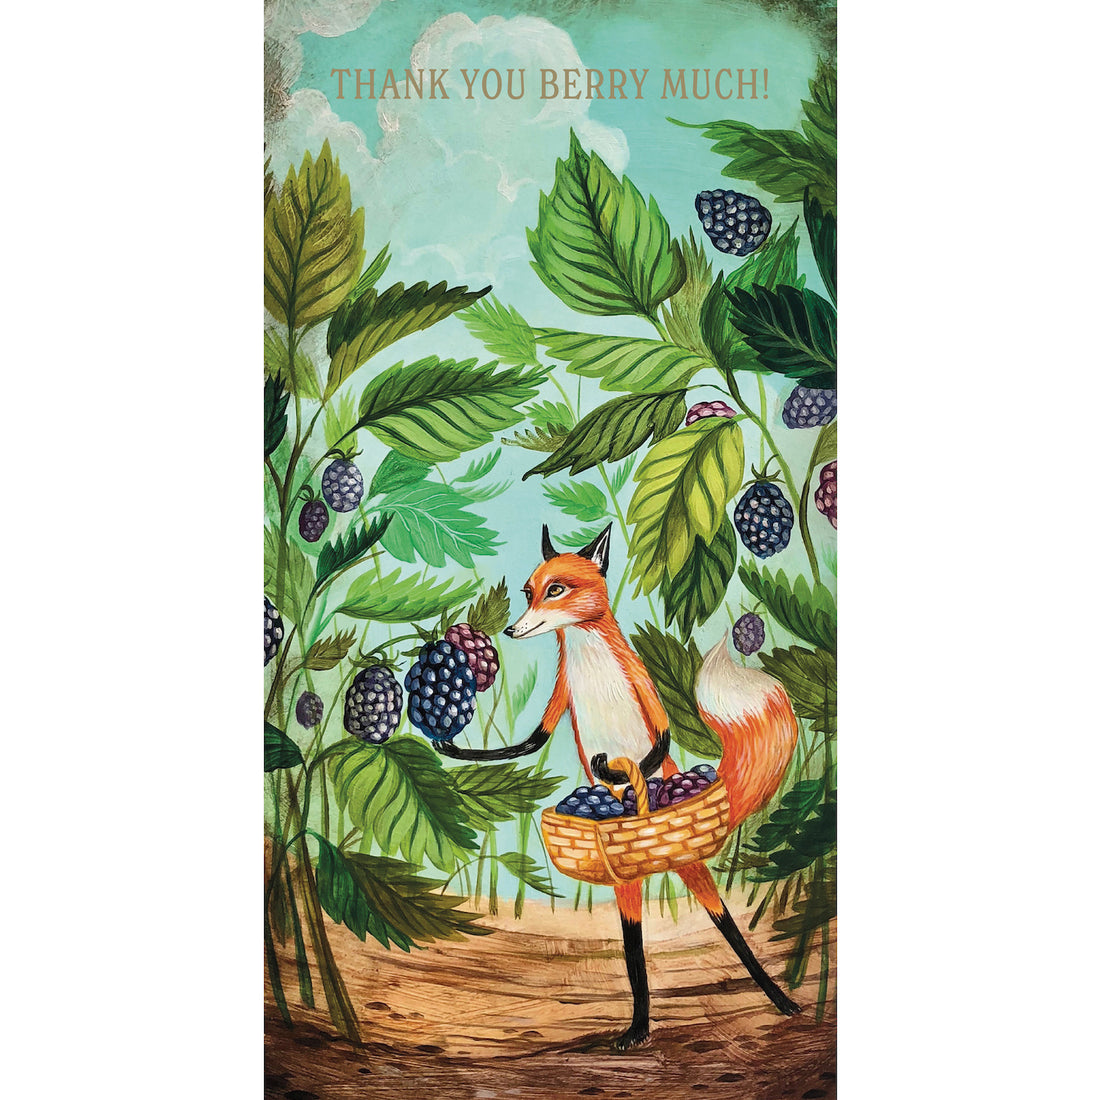 An artwork of a fox holding a basket of blackberries is adorned with gold foil on the Thank You Berry Much Card by Hester &amp; Cook.